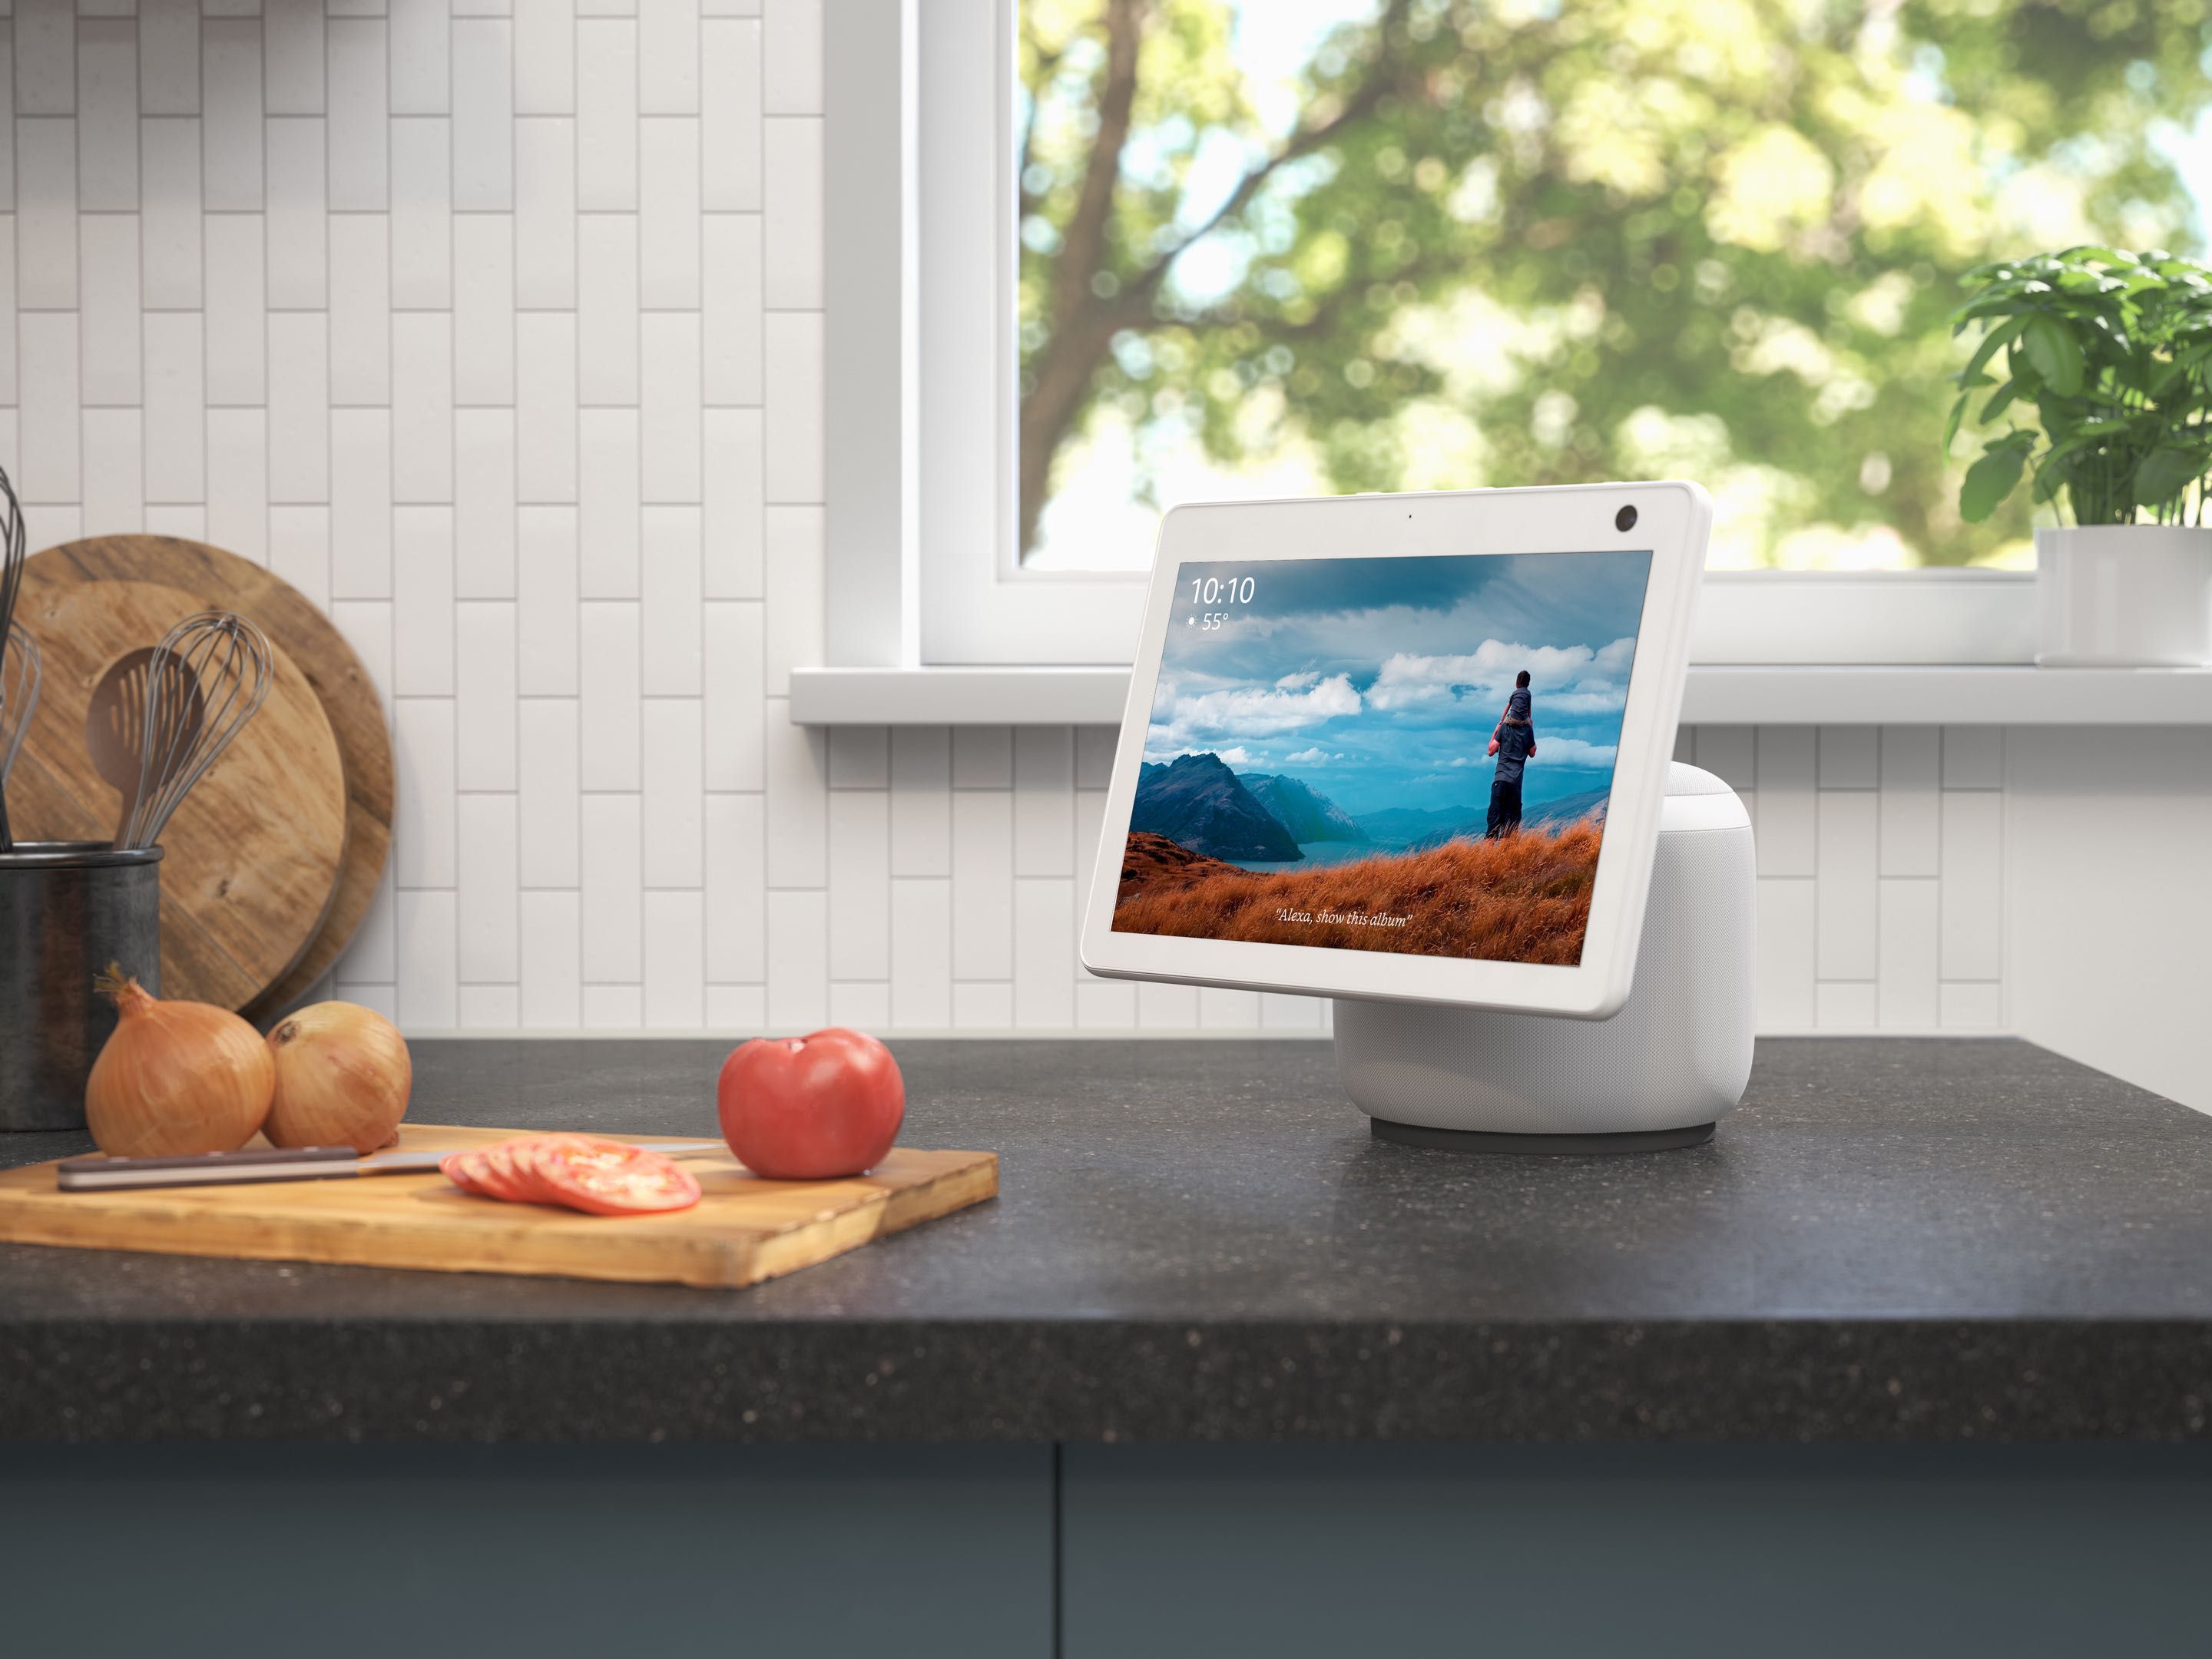 echo show on a surface